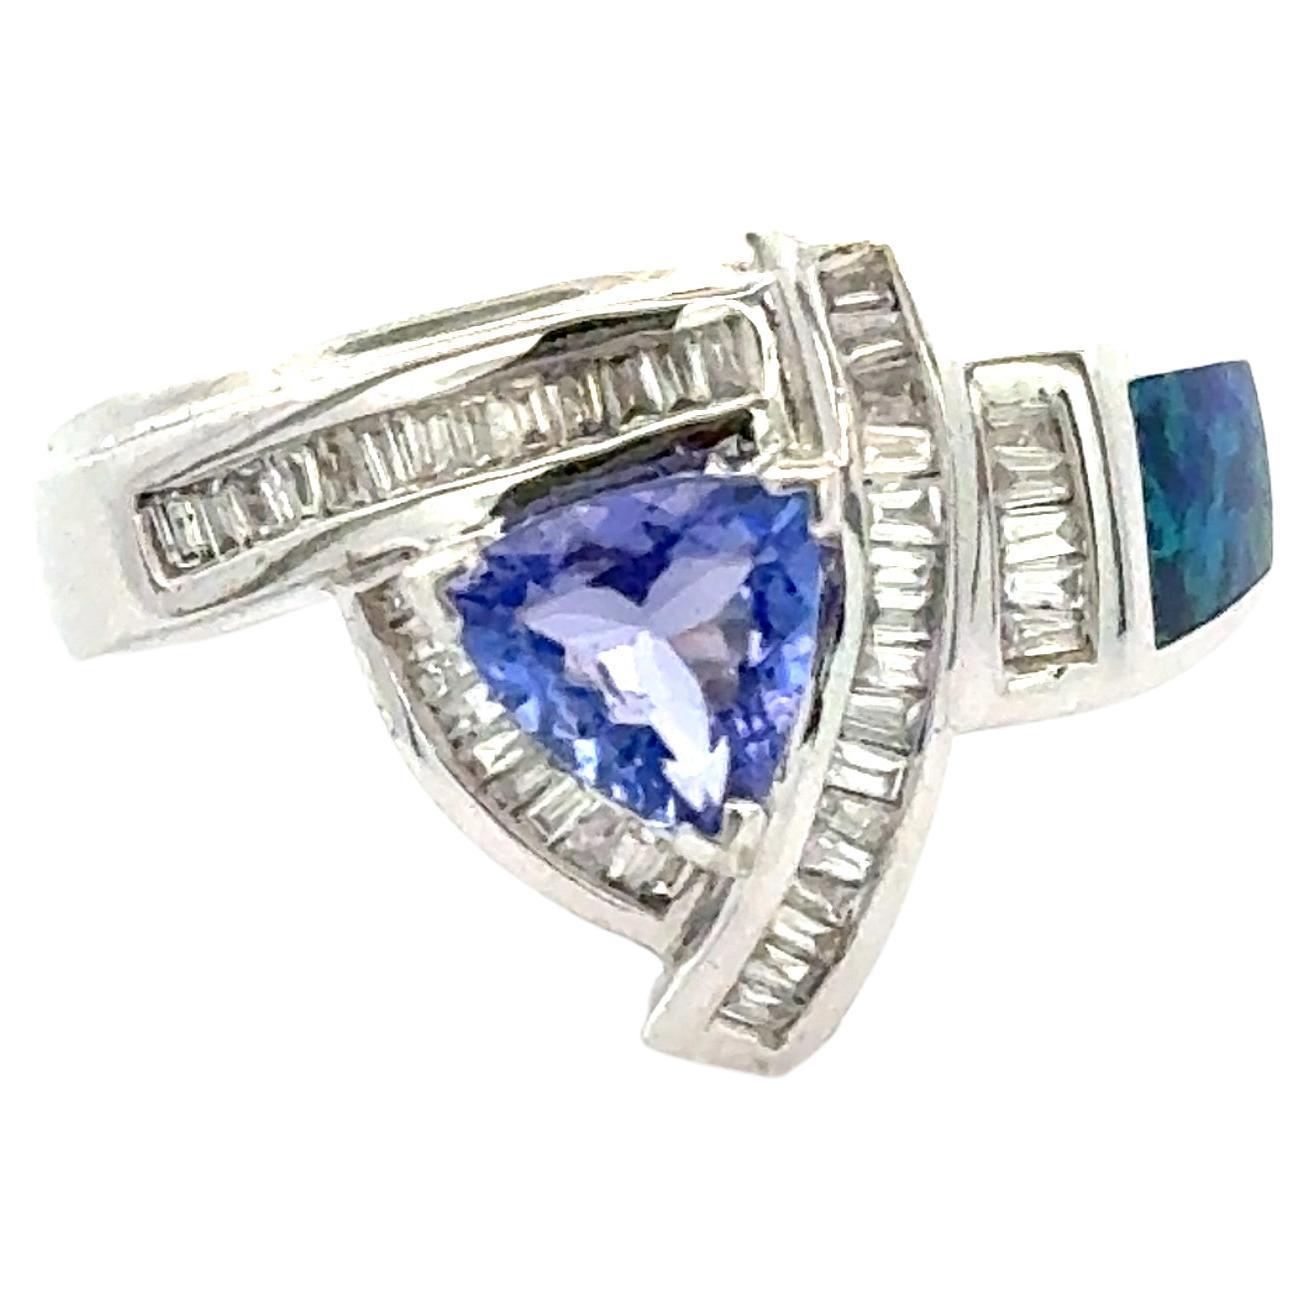 Vintage Tanzanite Inlaid Opal and Diamond Cluster 14K White Gold Ring 6.5 Grams